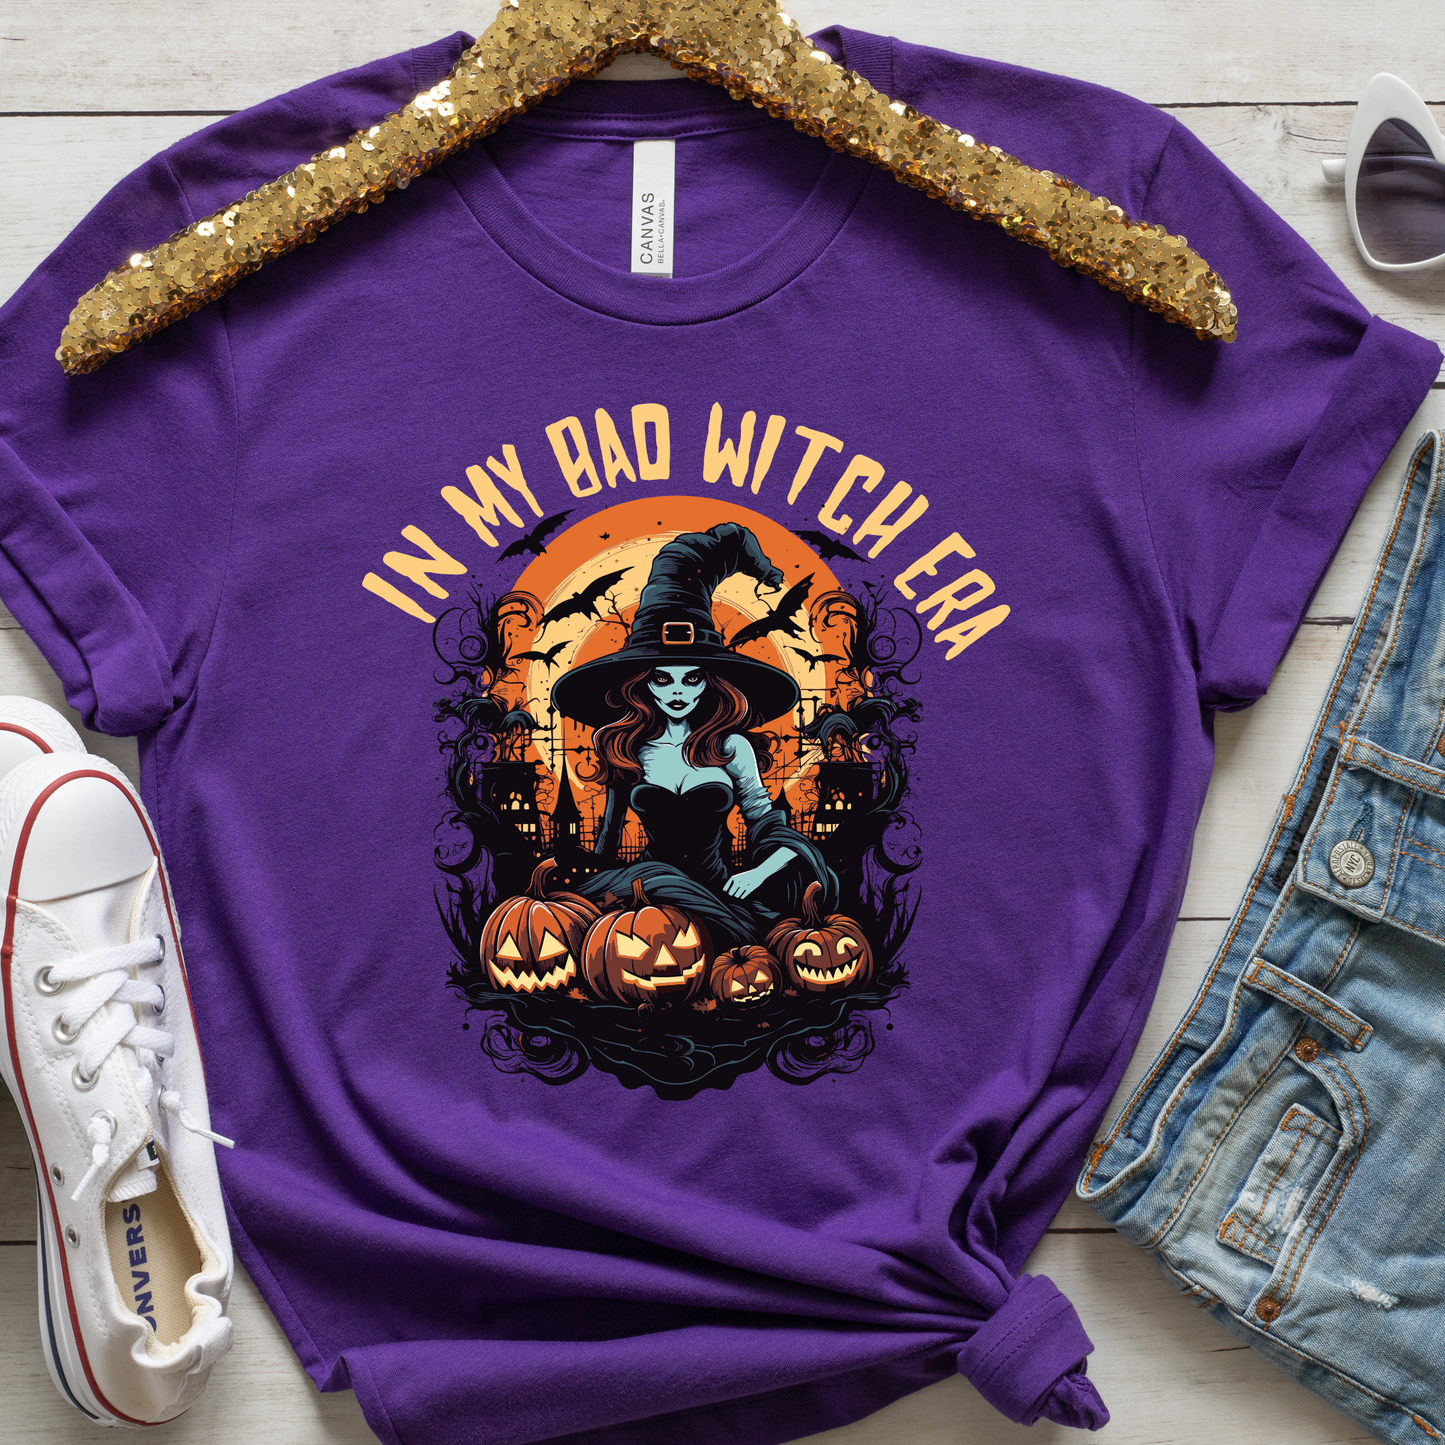 In My Bad Witch Era - Halloween Graphic Tee